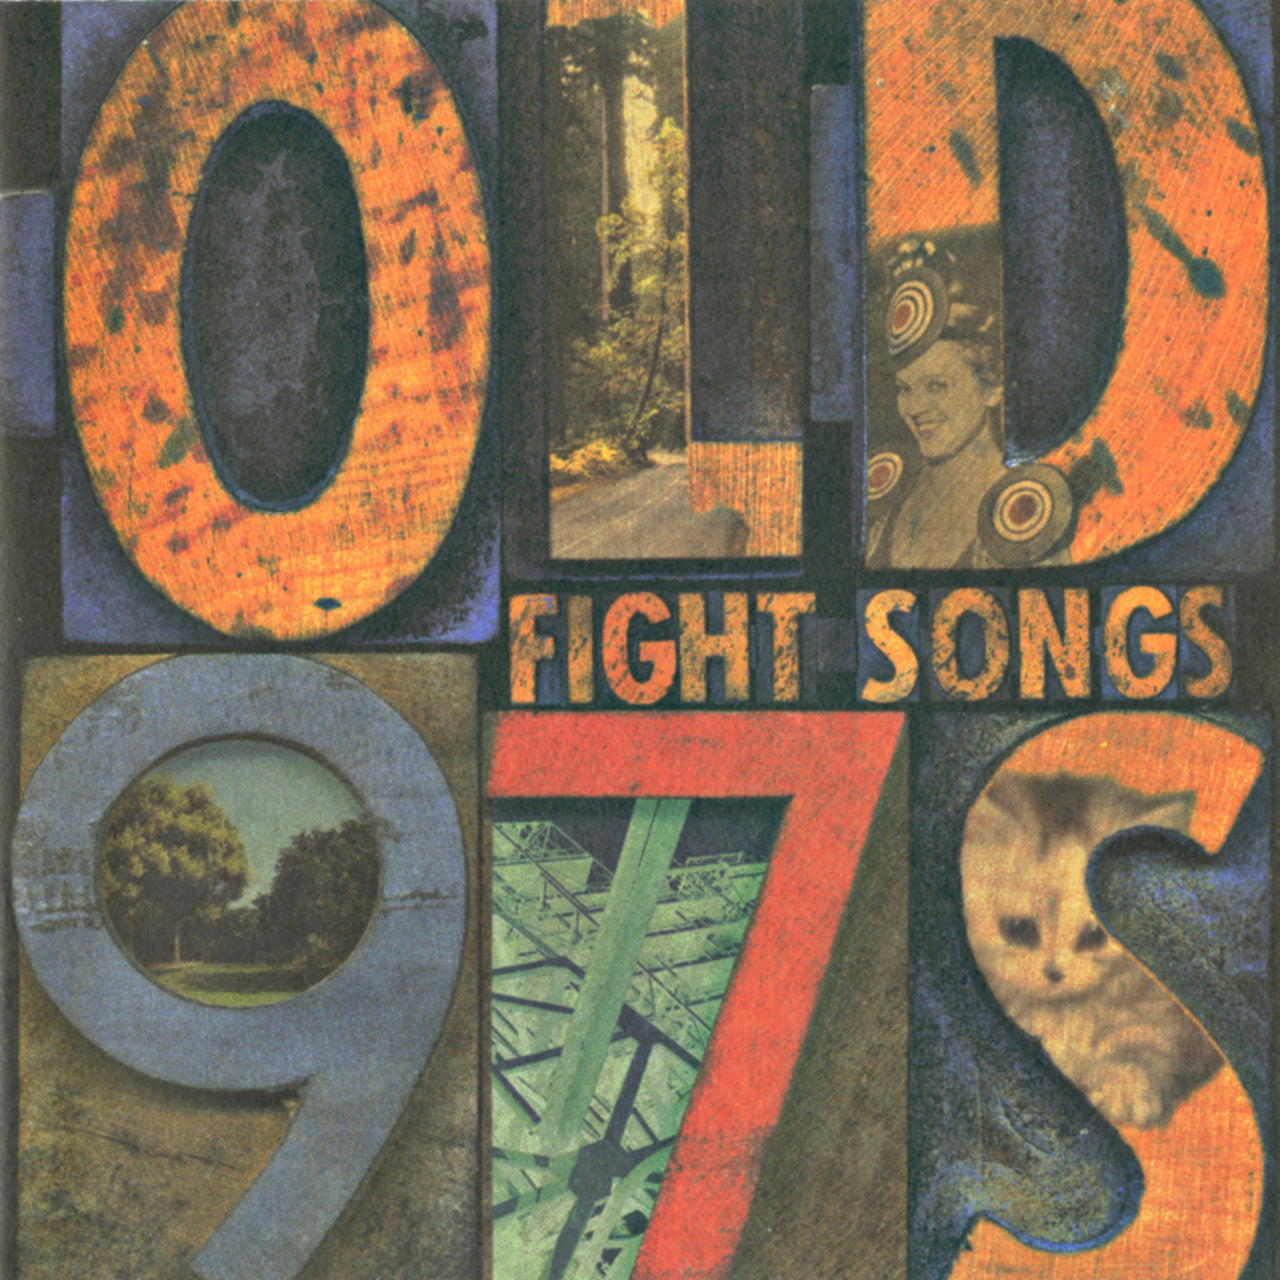 [DAMAGED] Old 97's - Fight Songs [Limited Deluxe Edition 3-lp]